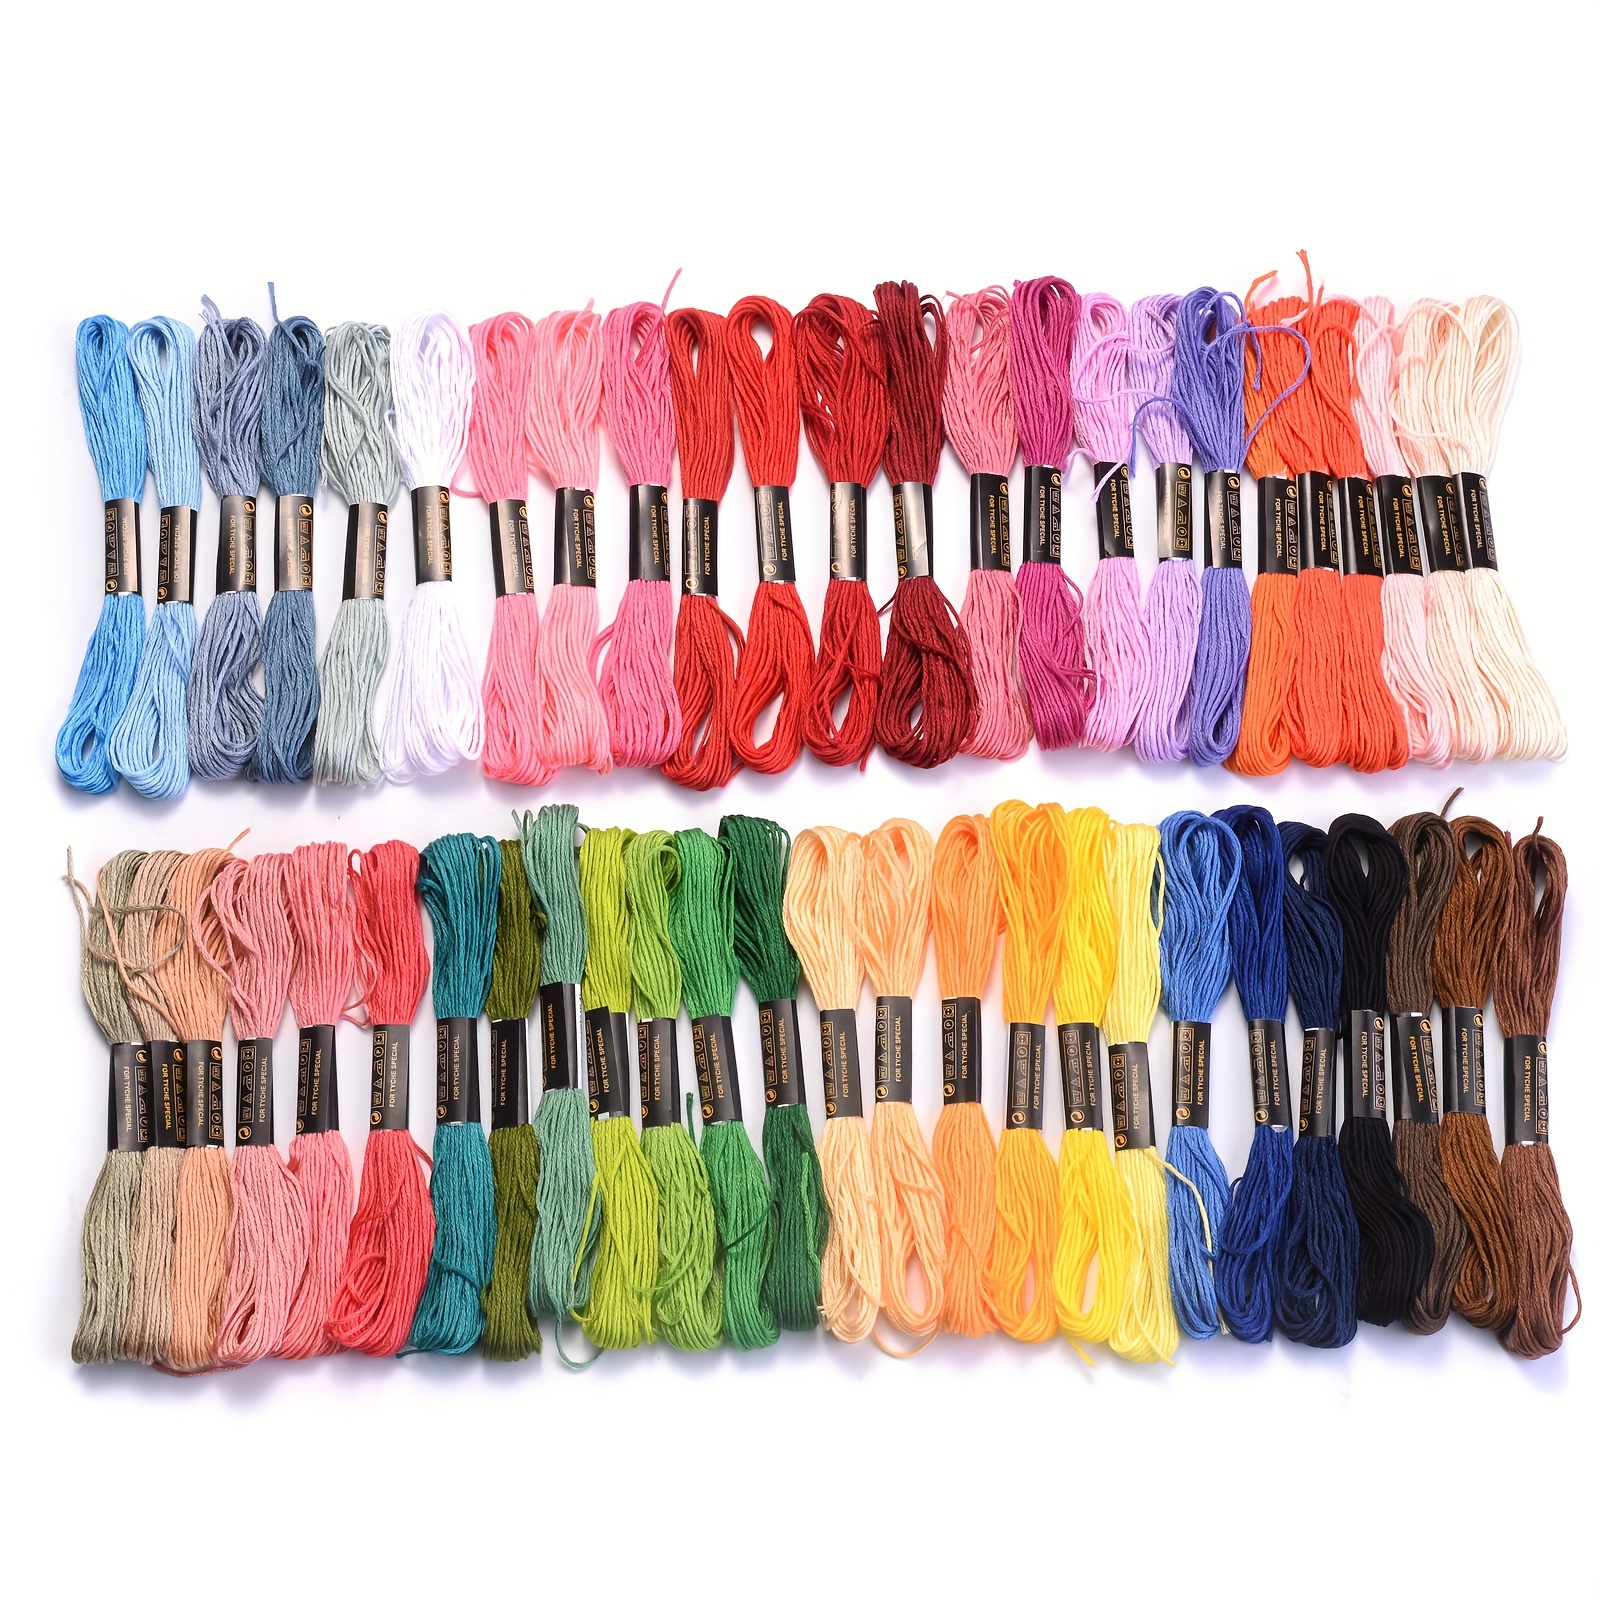 

50 Skeins Rainbow Color Embroidery Floss Cross Stitch Threads Embroidery Thread For Friendship Bracelet Making Embroidery String For Craft